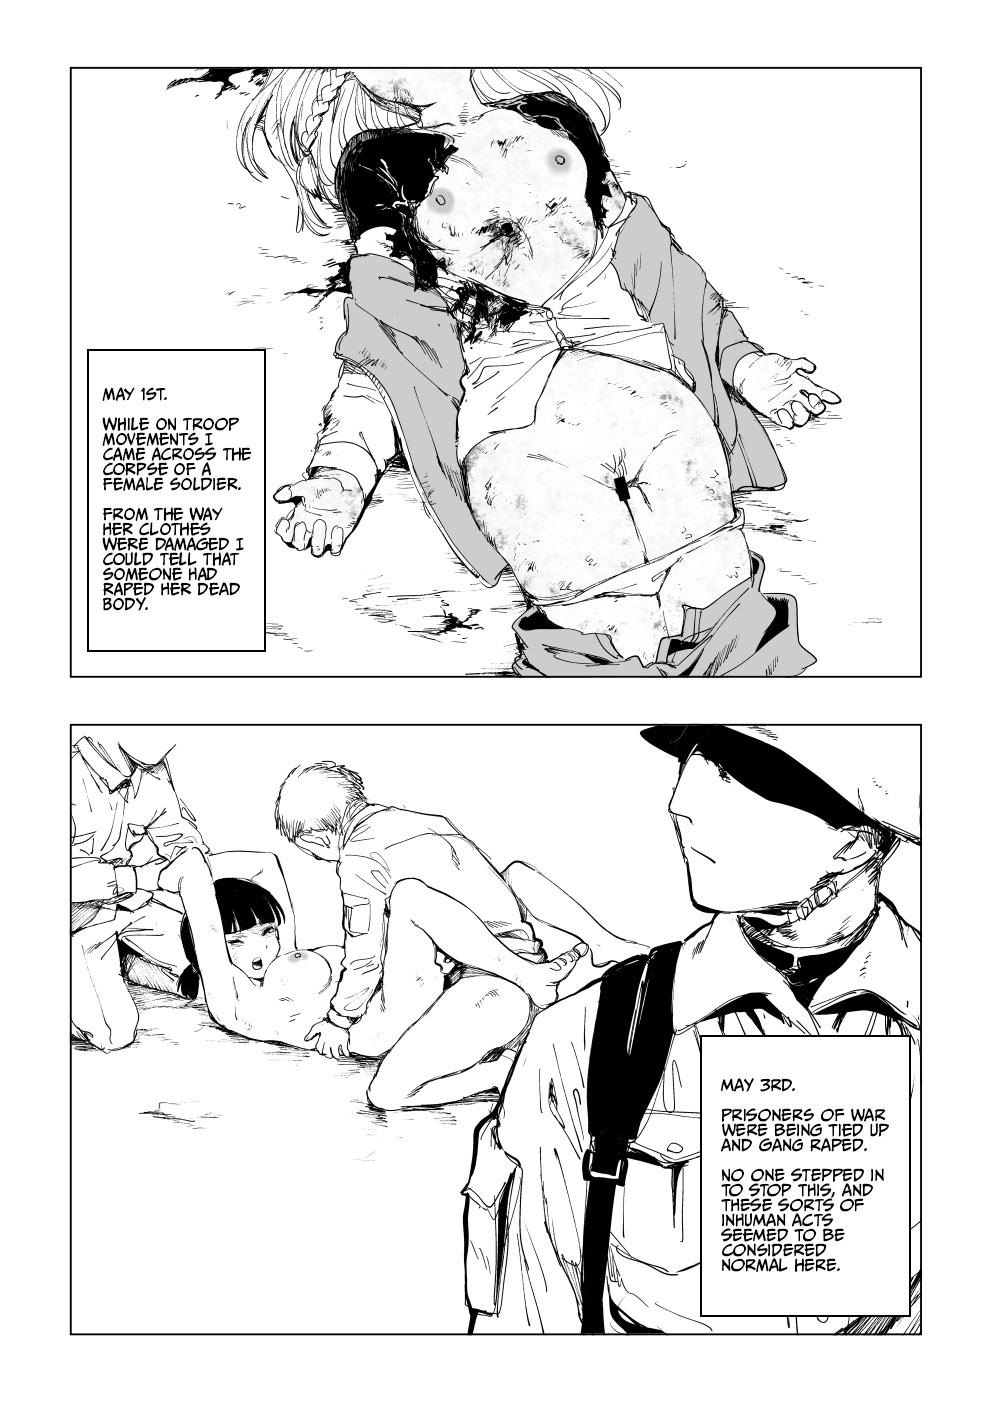 Farting Fallen on the Battlefield - The Memoirs of Private First Class Blaauw - Original This - Page 1